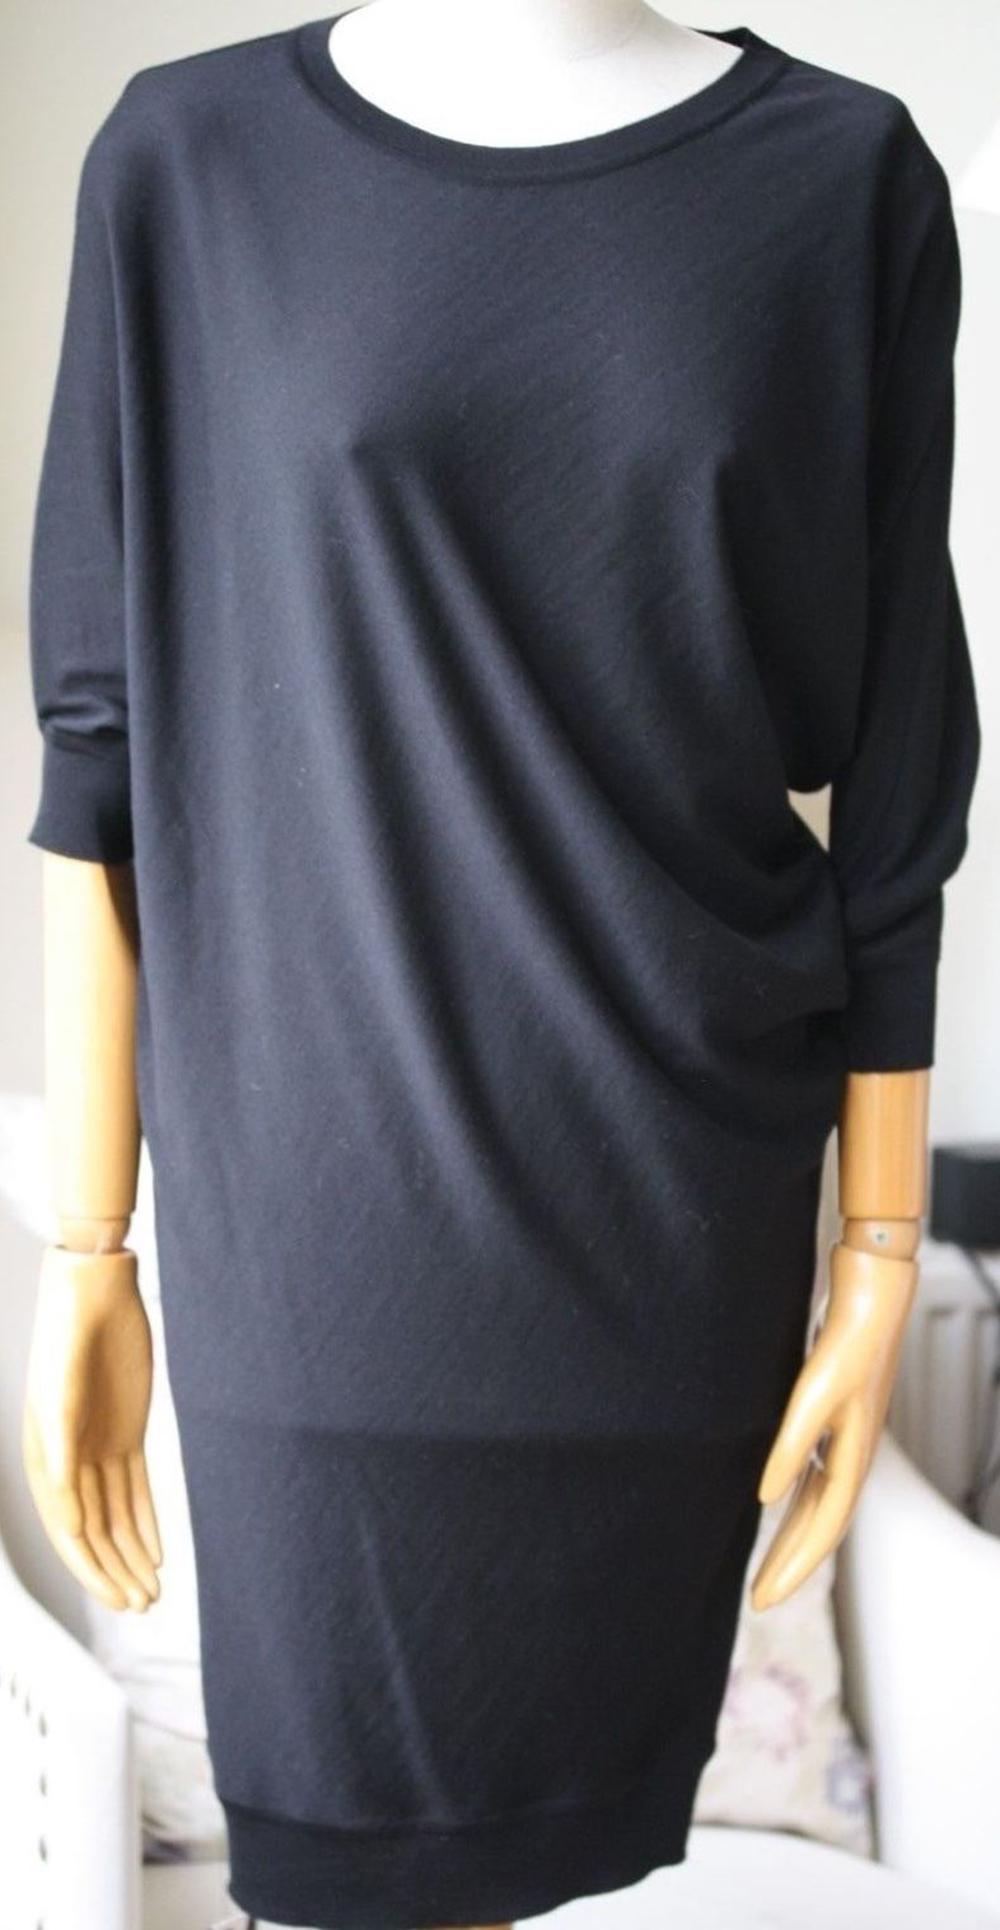 Alexander McQueen's asymmetric sweater dress has been crafted in Italy from soft mid-weight wool. This dolman-sleeve style will work day or night. Black mid-weight wool. Asymmetric dolman sleeves, ribbed trims. Slips on. 100% wool. Designer colour: